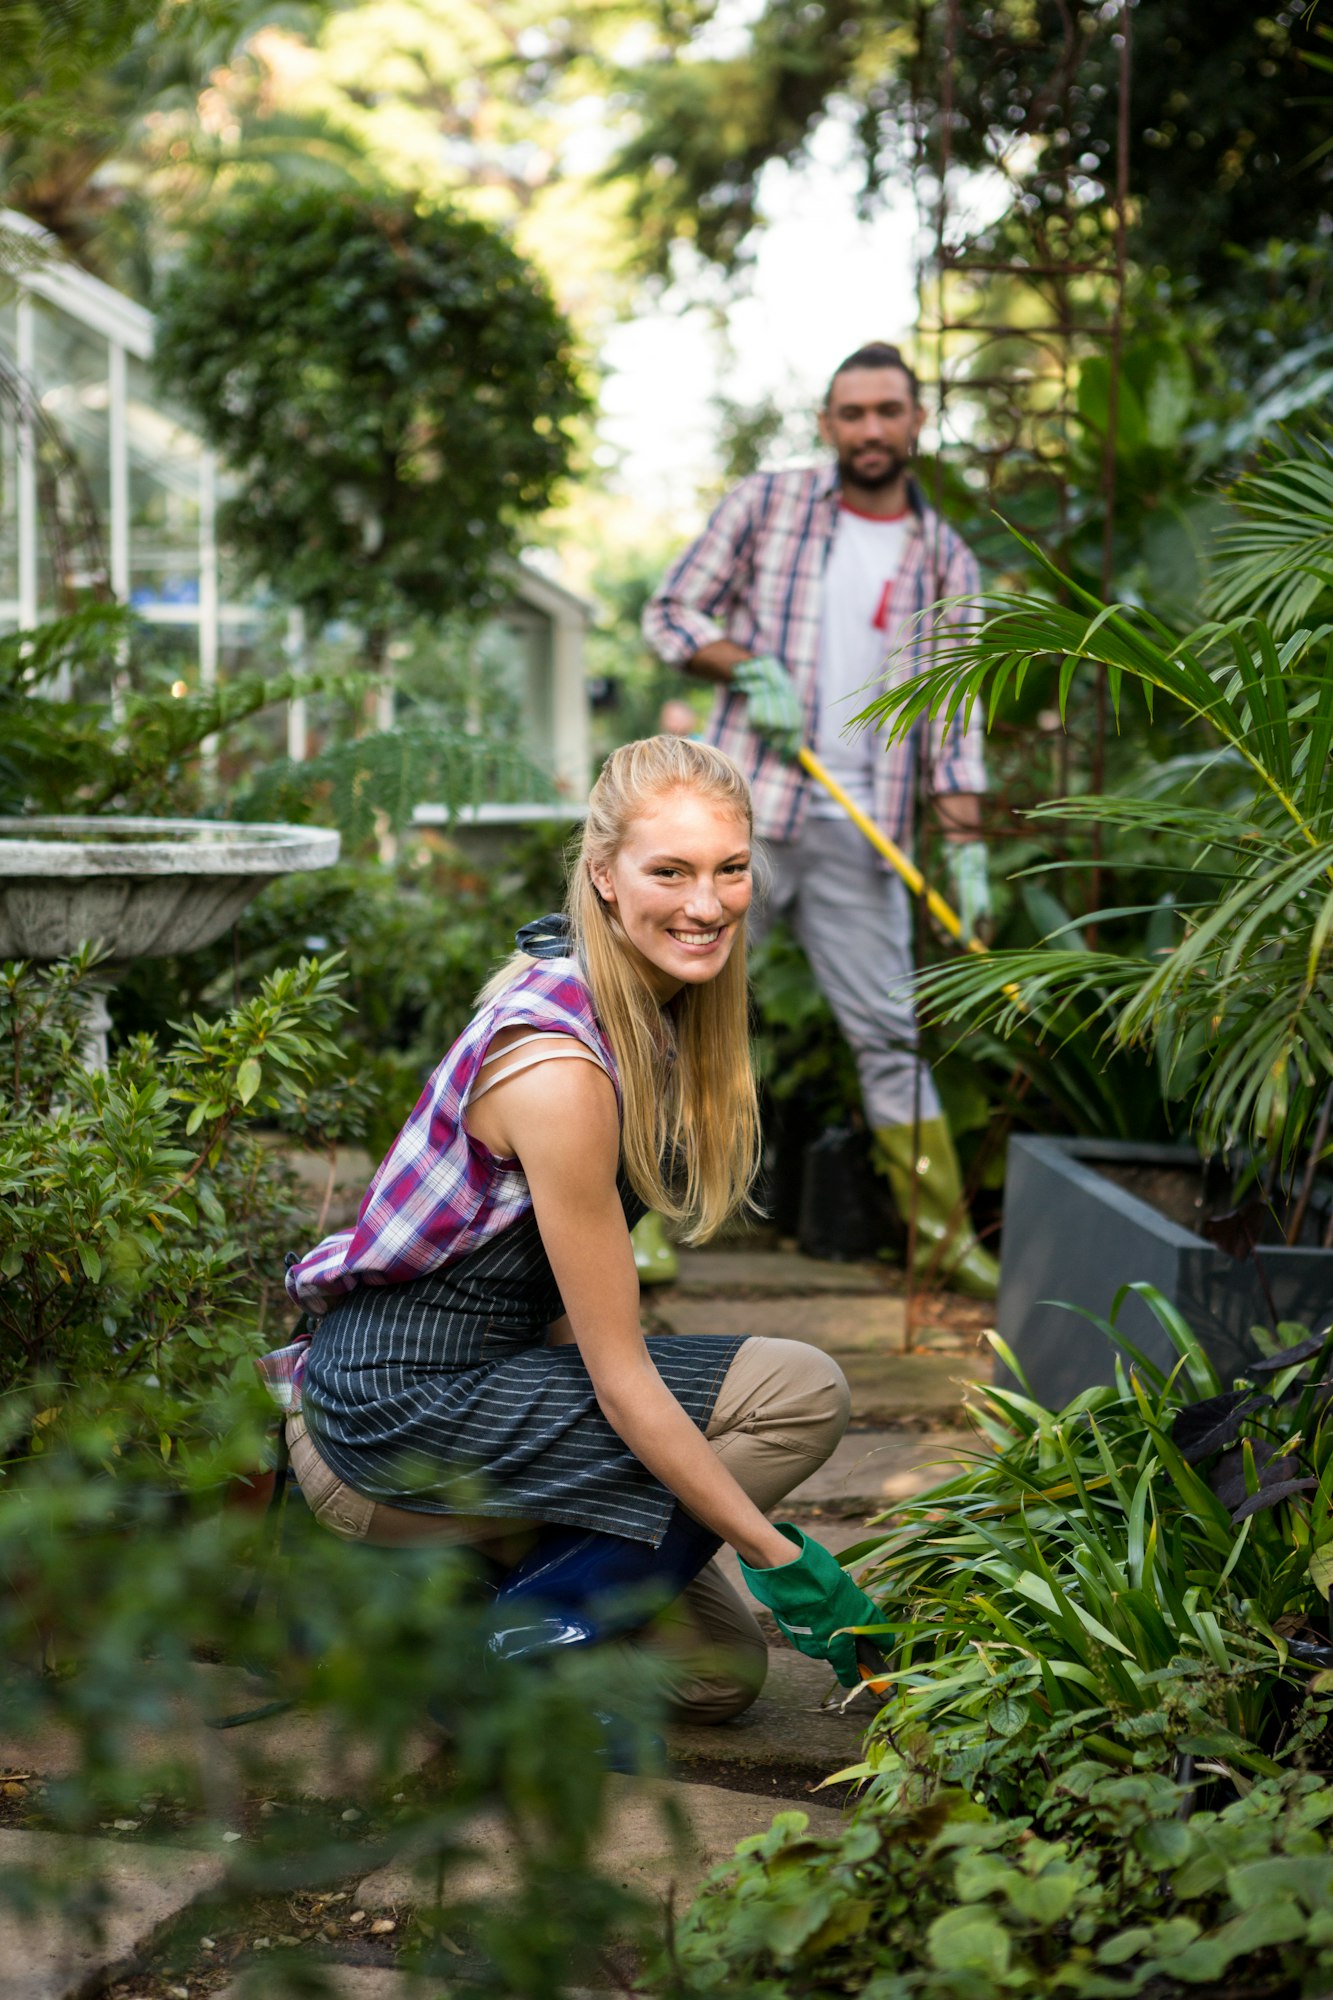 Monthly Maintenance Tips for Zone 10 Gardens